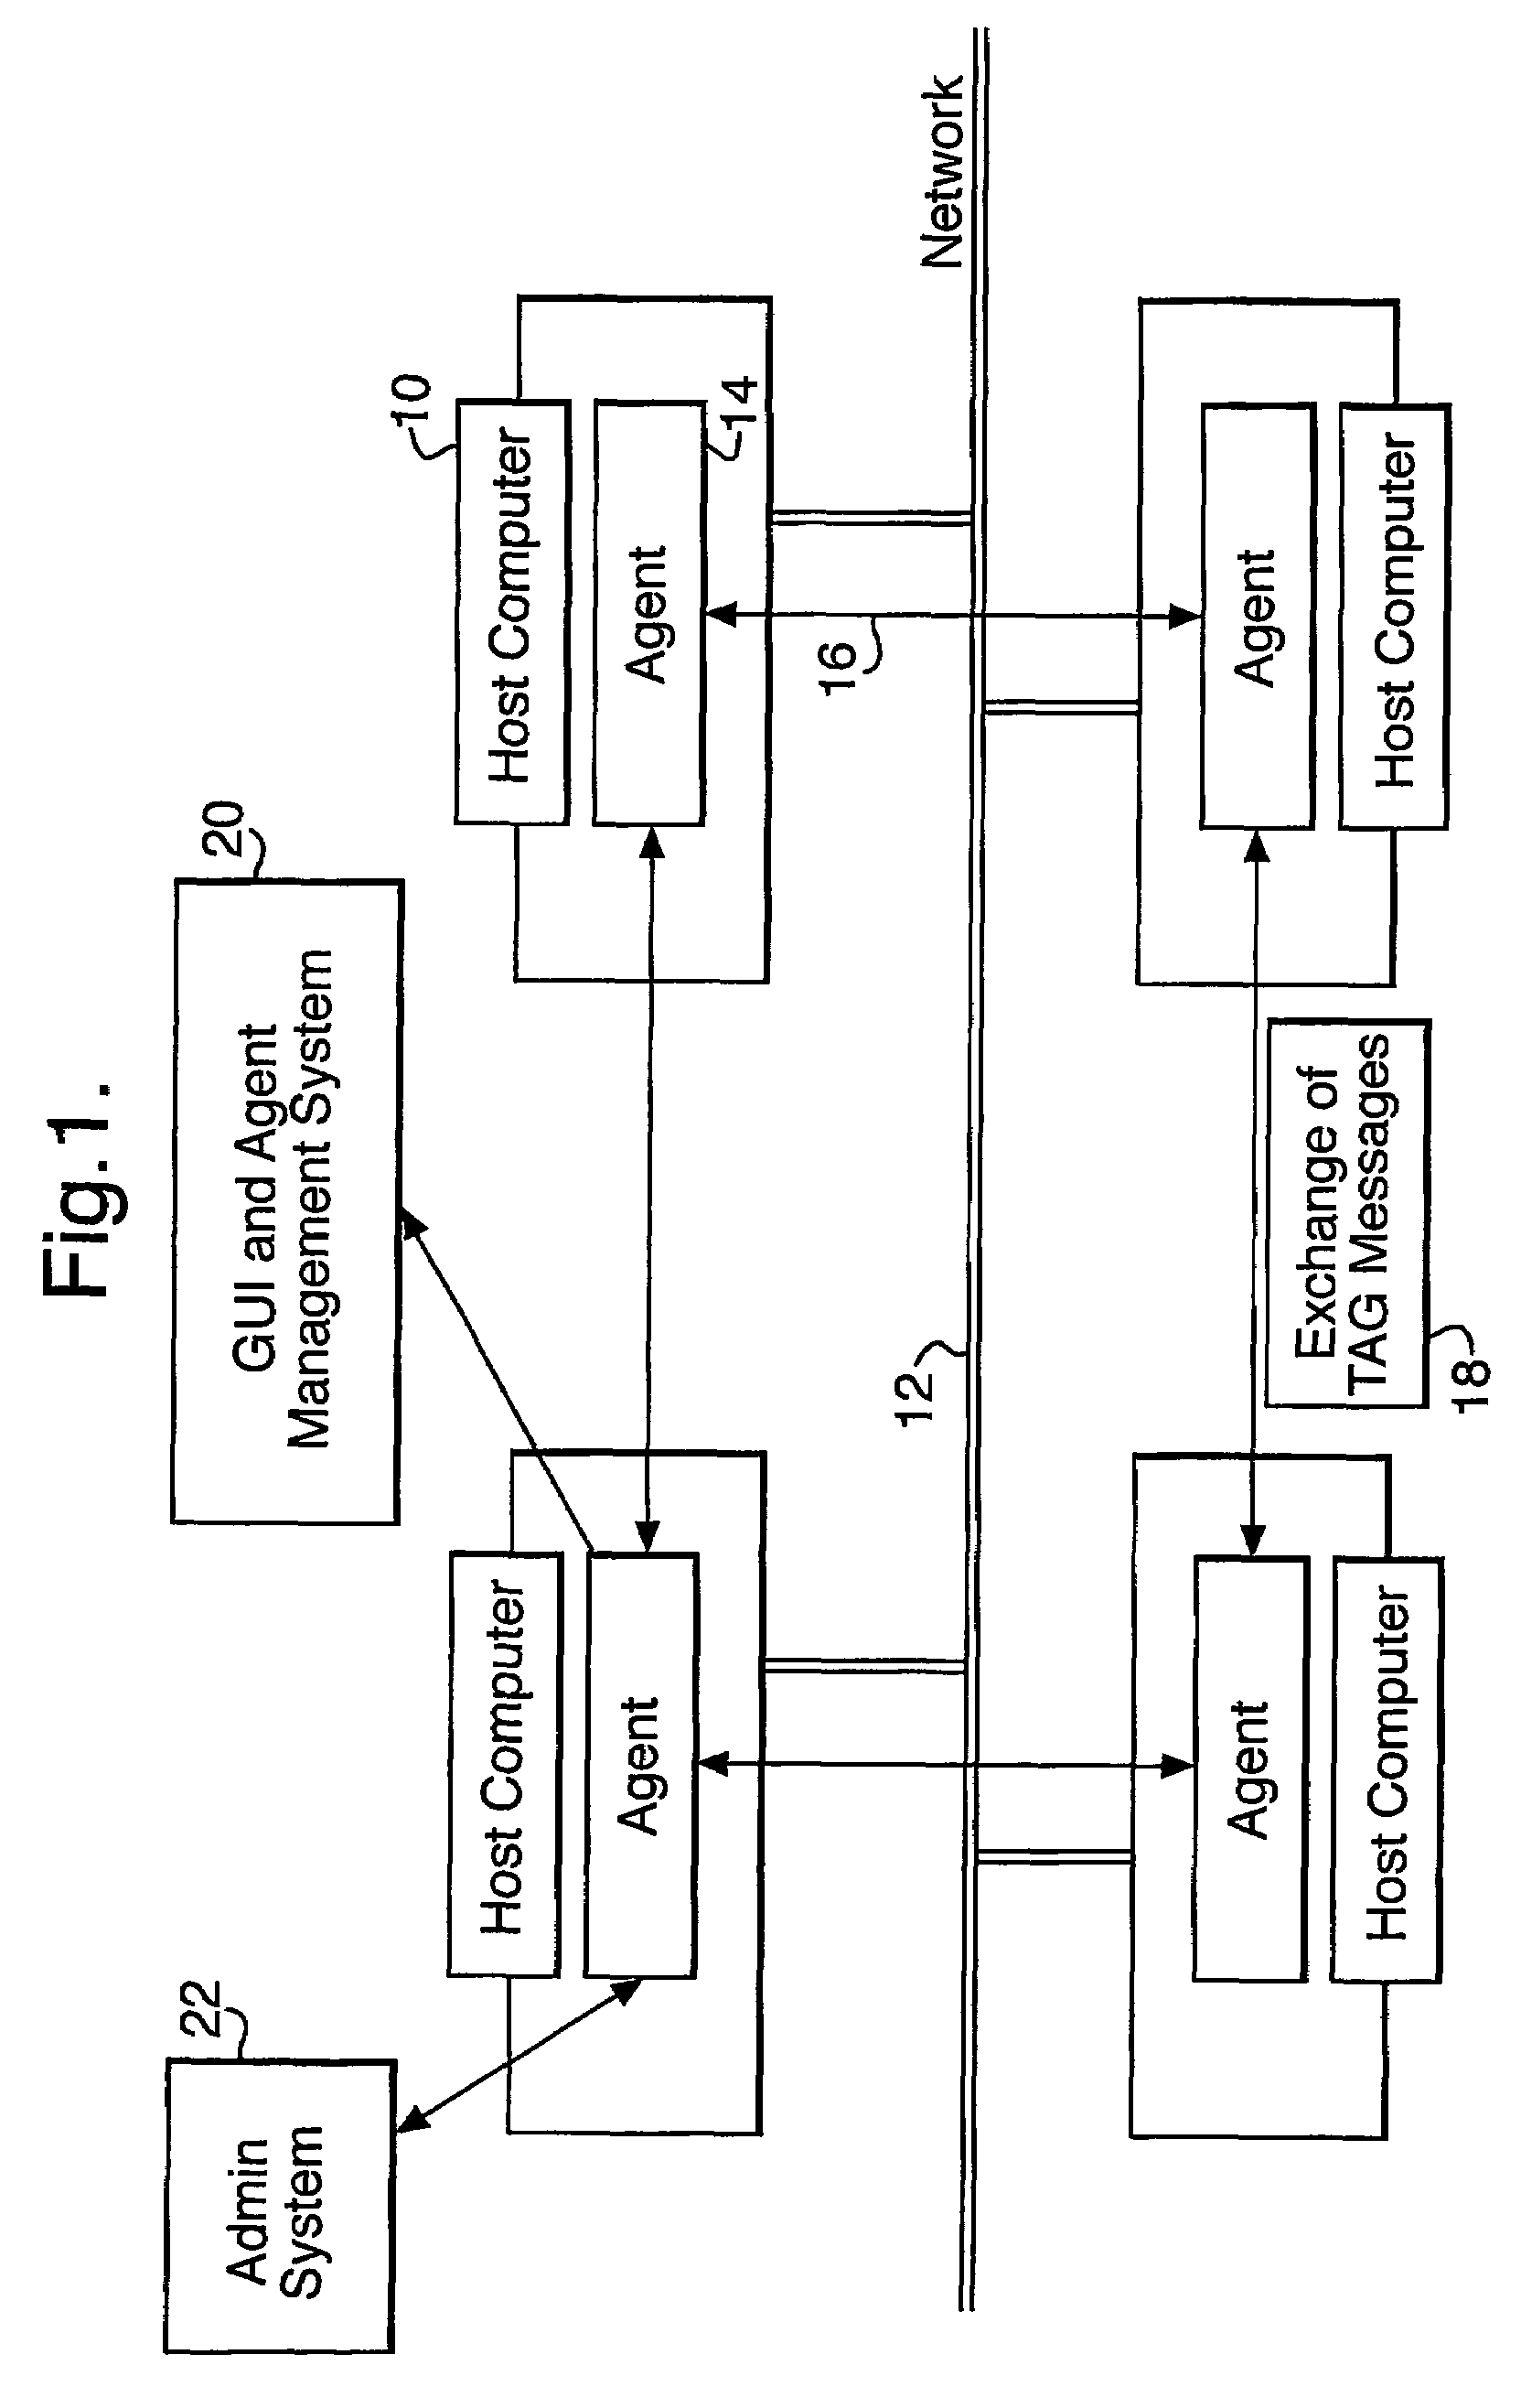 Agent-based intrusion detection system